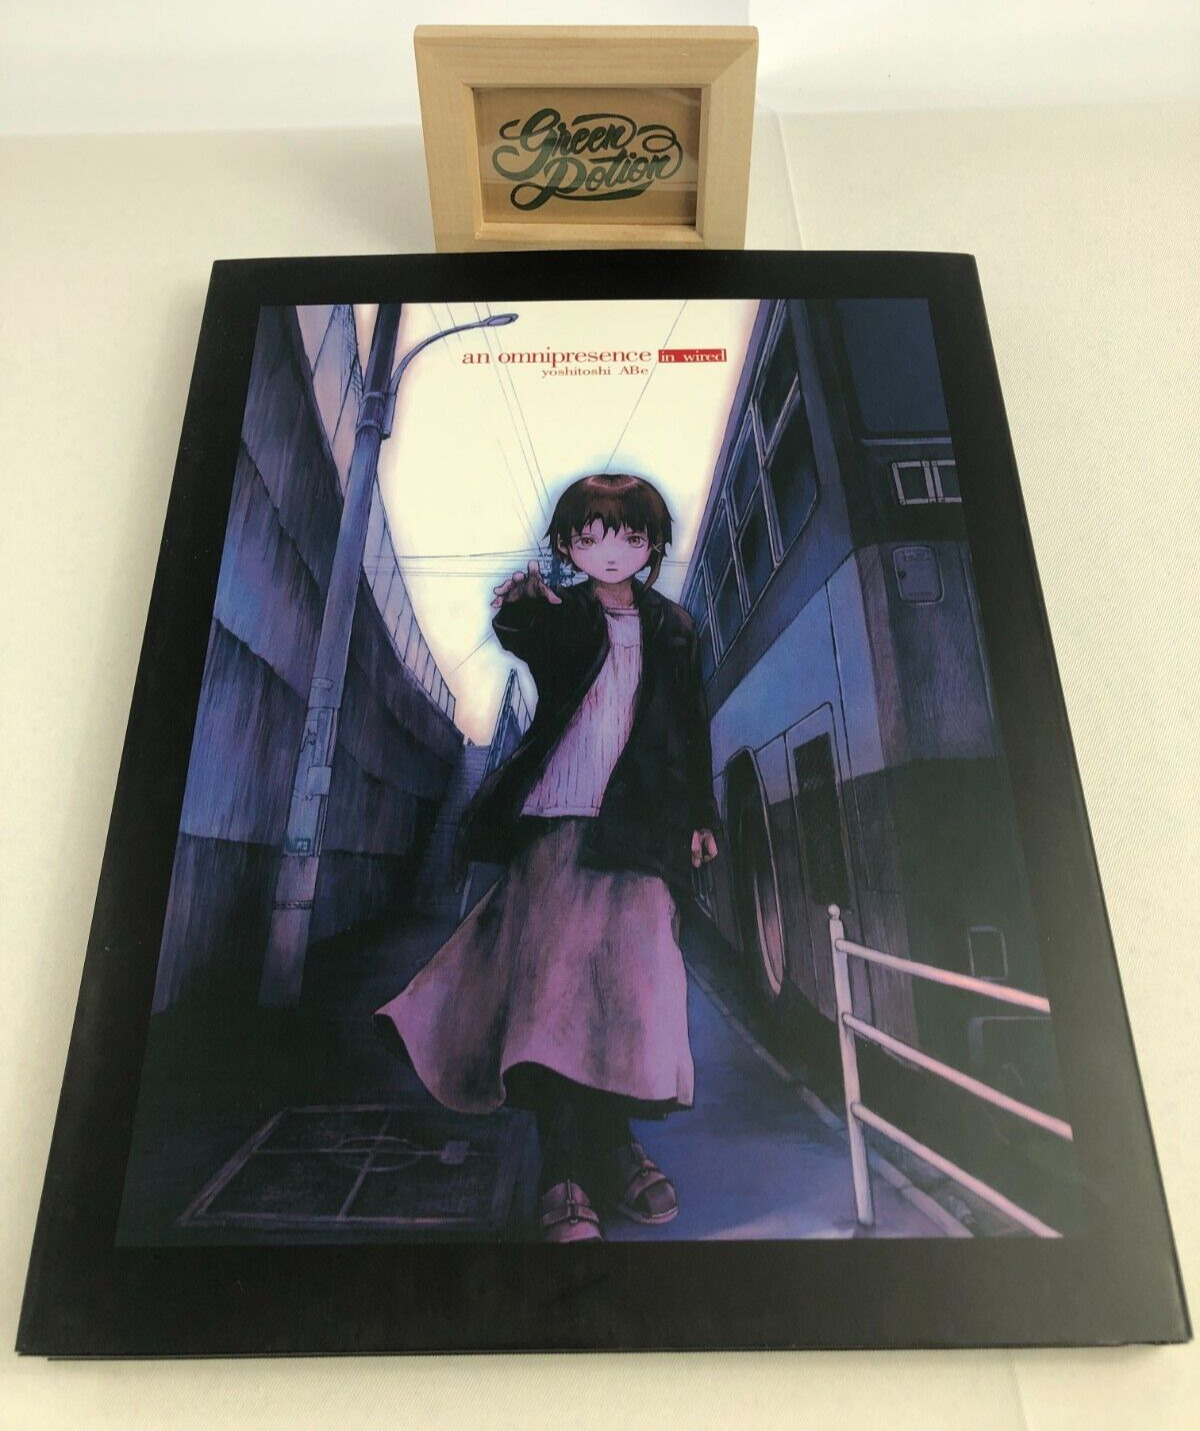 Yoshitoshi ABe serial experiments lain Art book an omnipresence in wired reprint